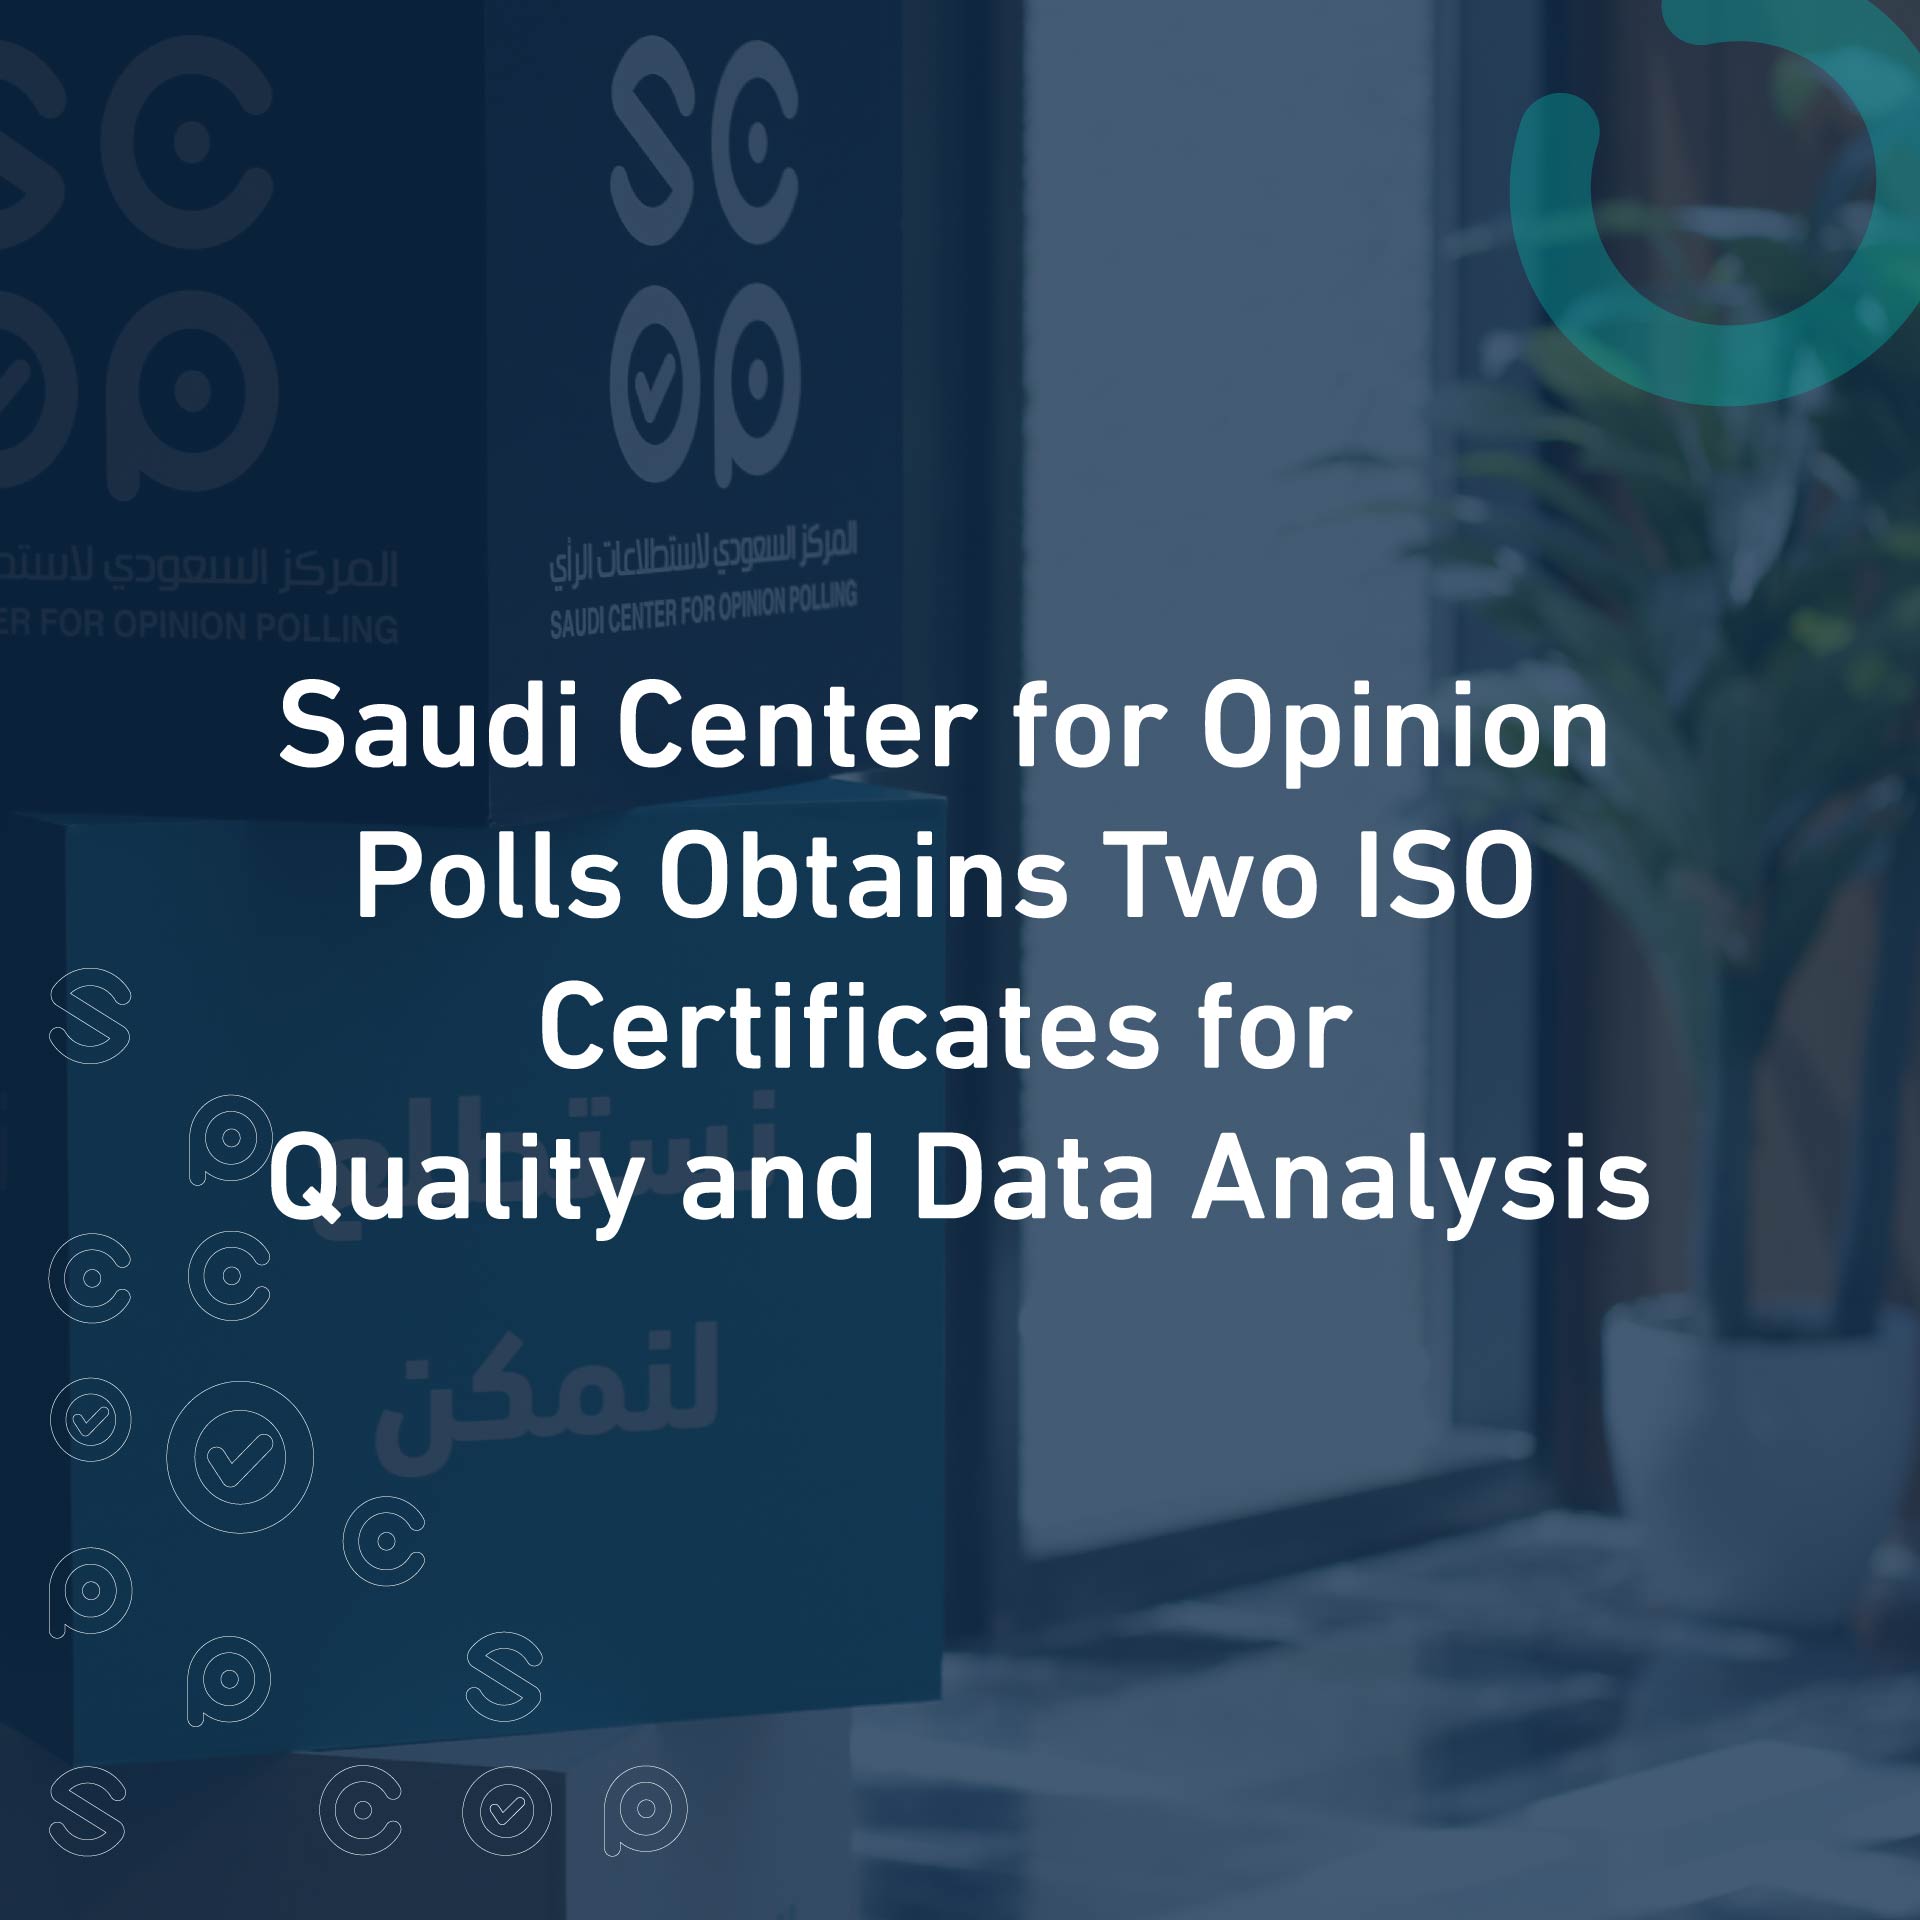 Saudi Center for Opinion Polls Obtains Two ISO Certificates for Quality and Data Analysis